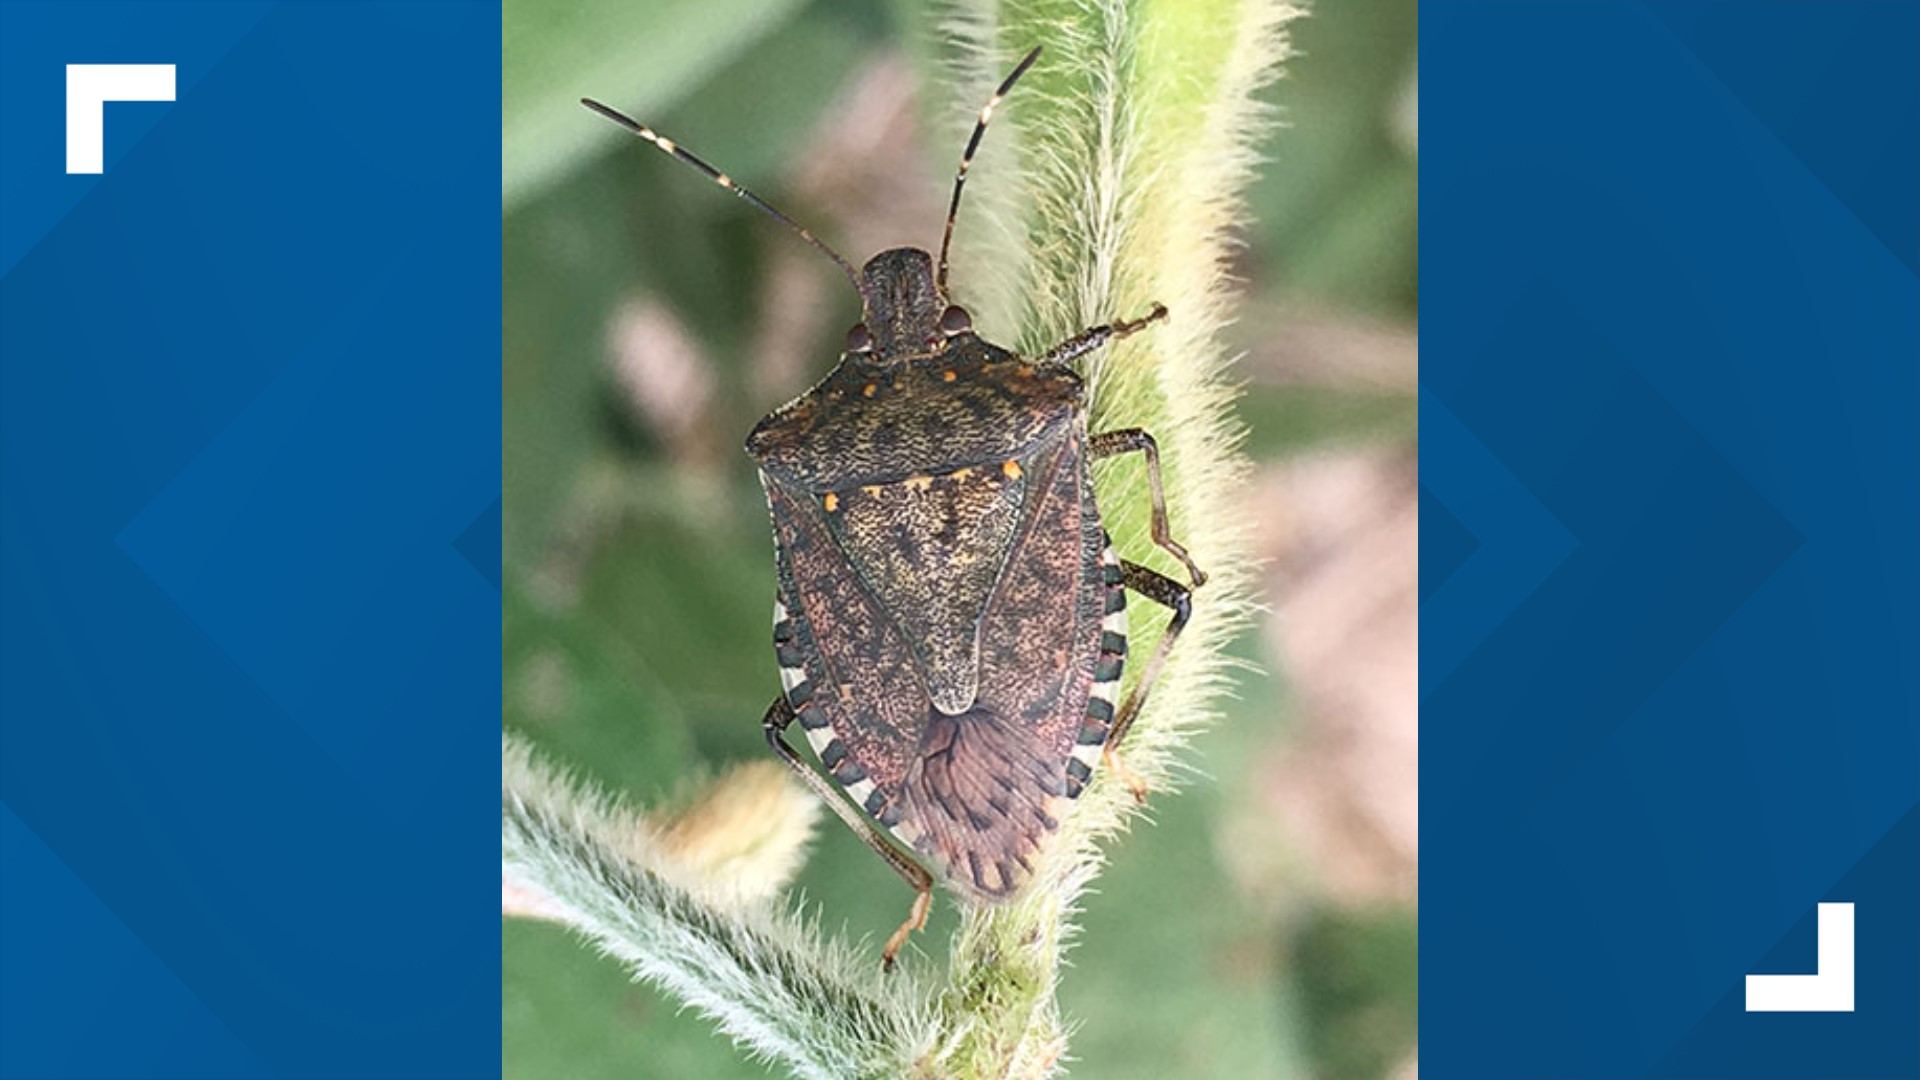 Stink bugs looking for warm home as cold weather nears